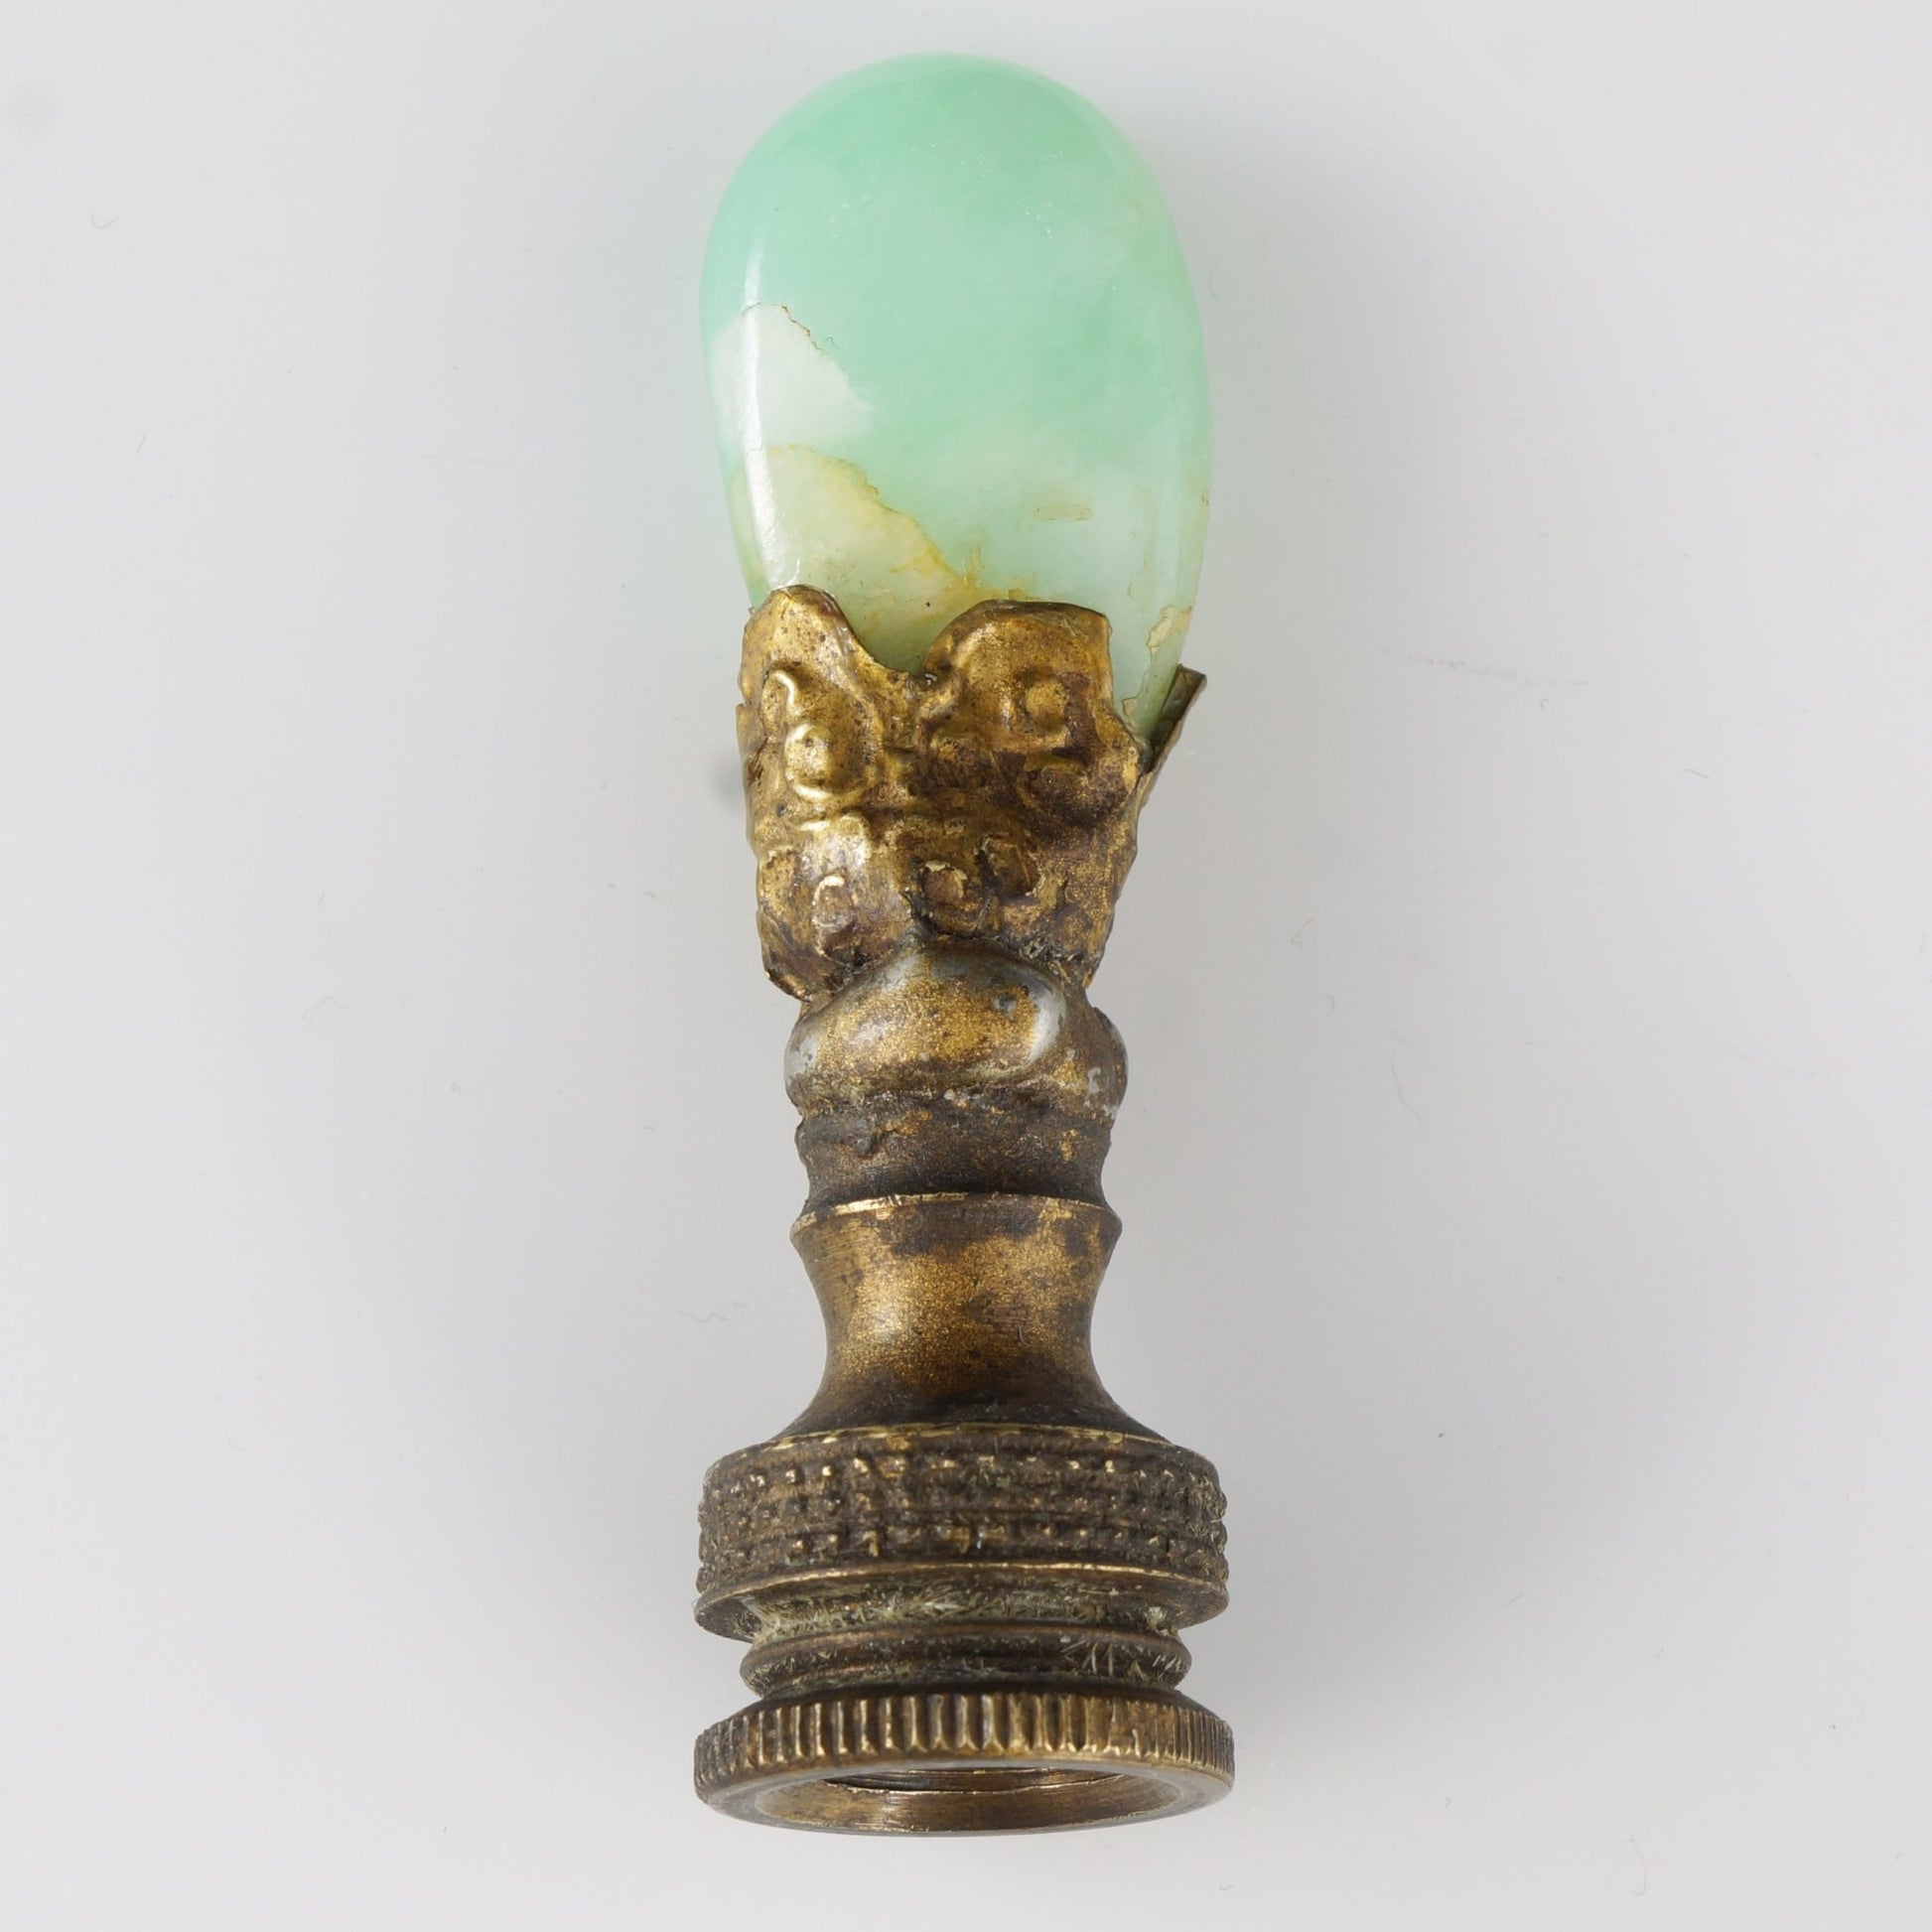 Vintage Chinese Green Jadeite Lamp Finial Republic Period - Bear and Raven Antiques